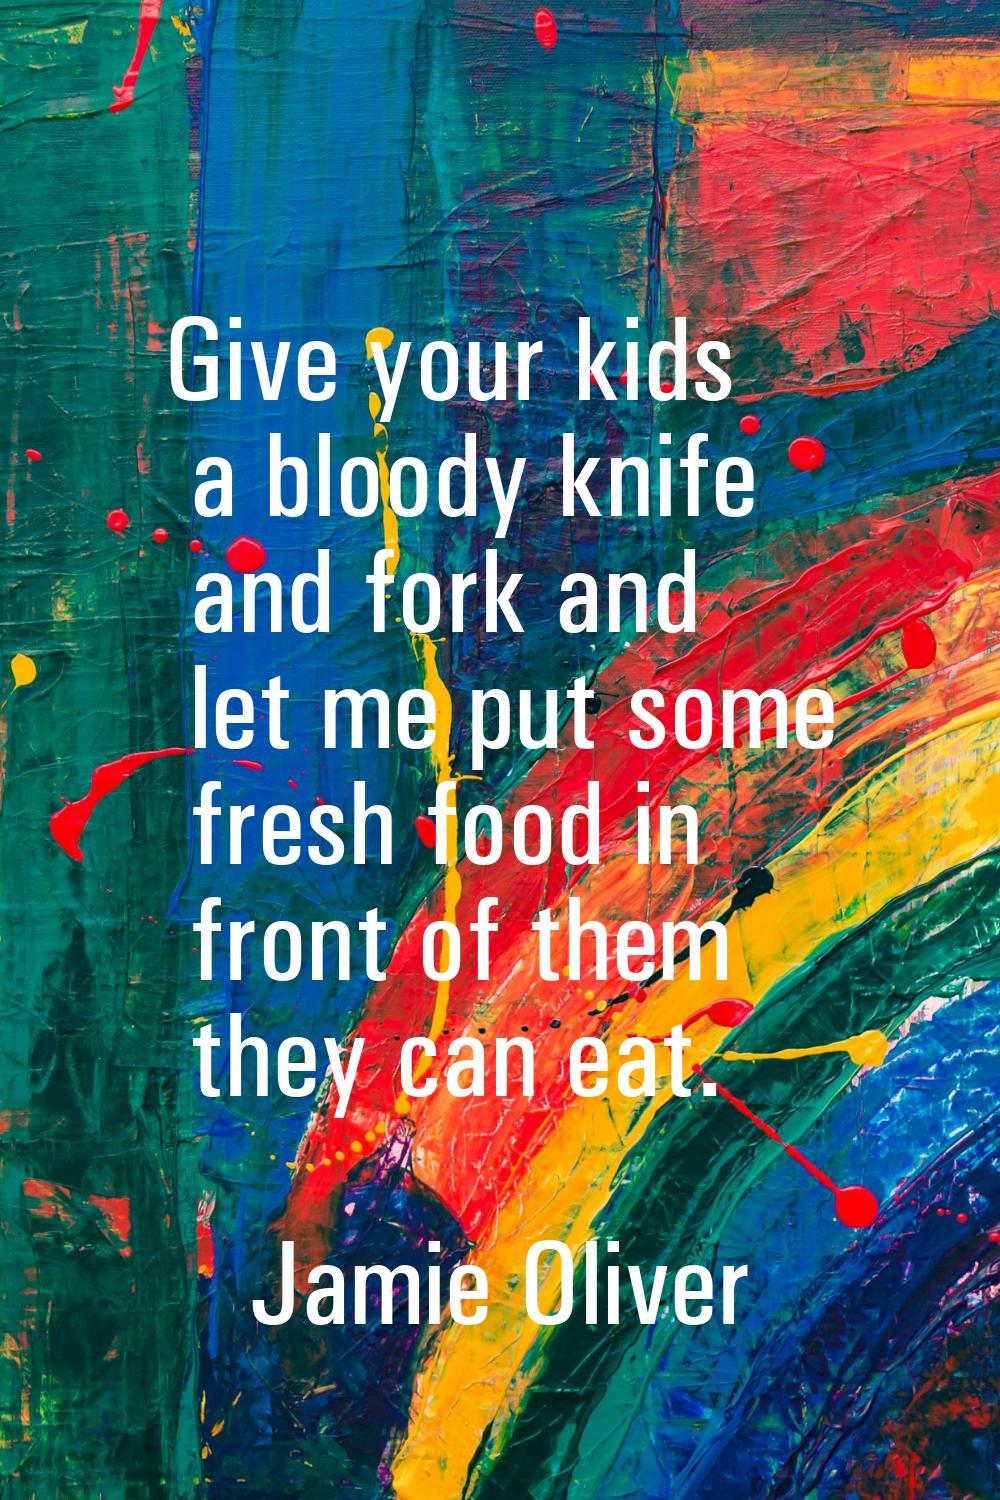 Give your kids a bloody knife and fork and let me put some fresh food in front of them they can eat